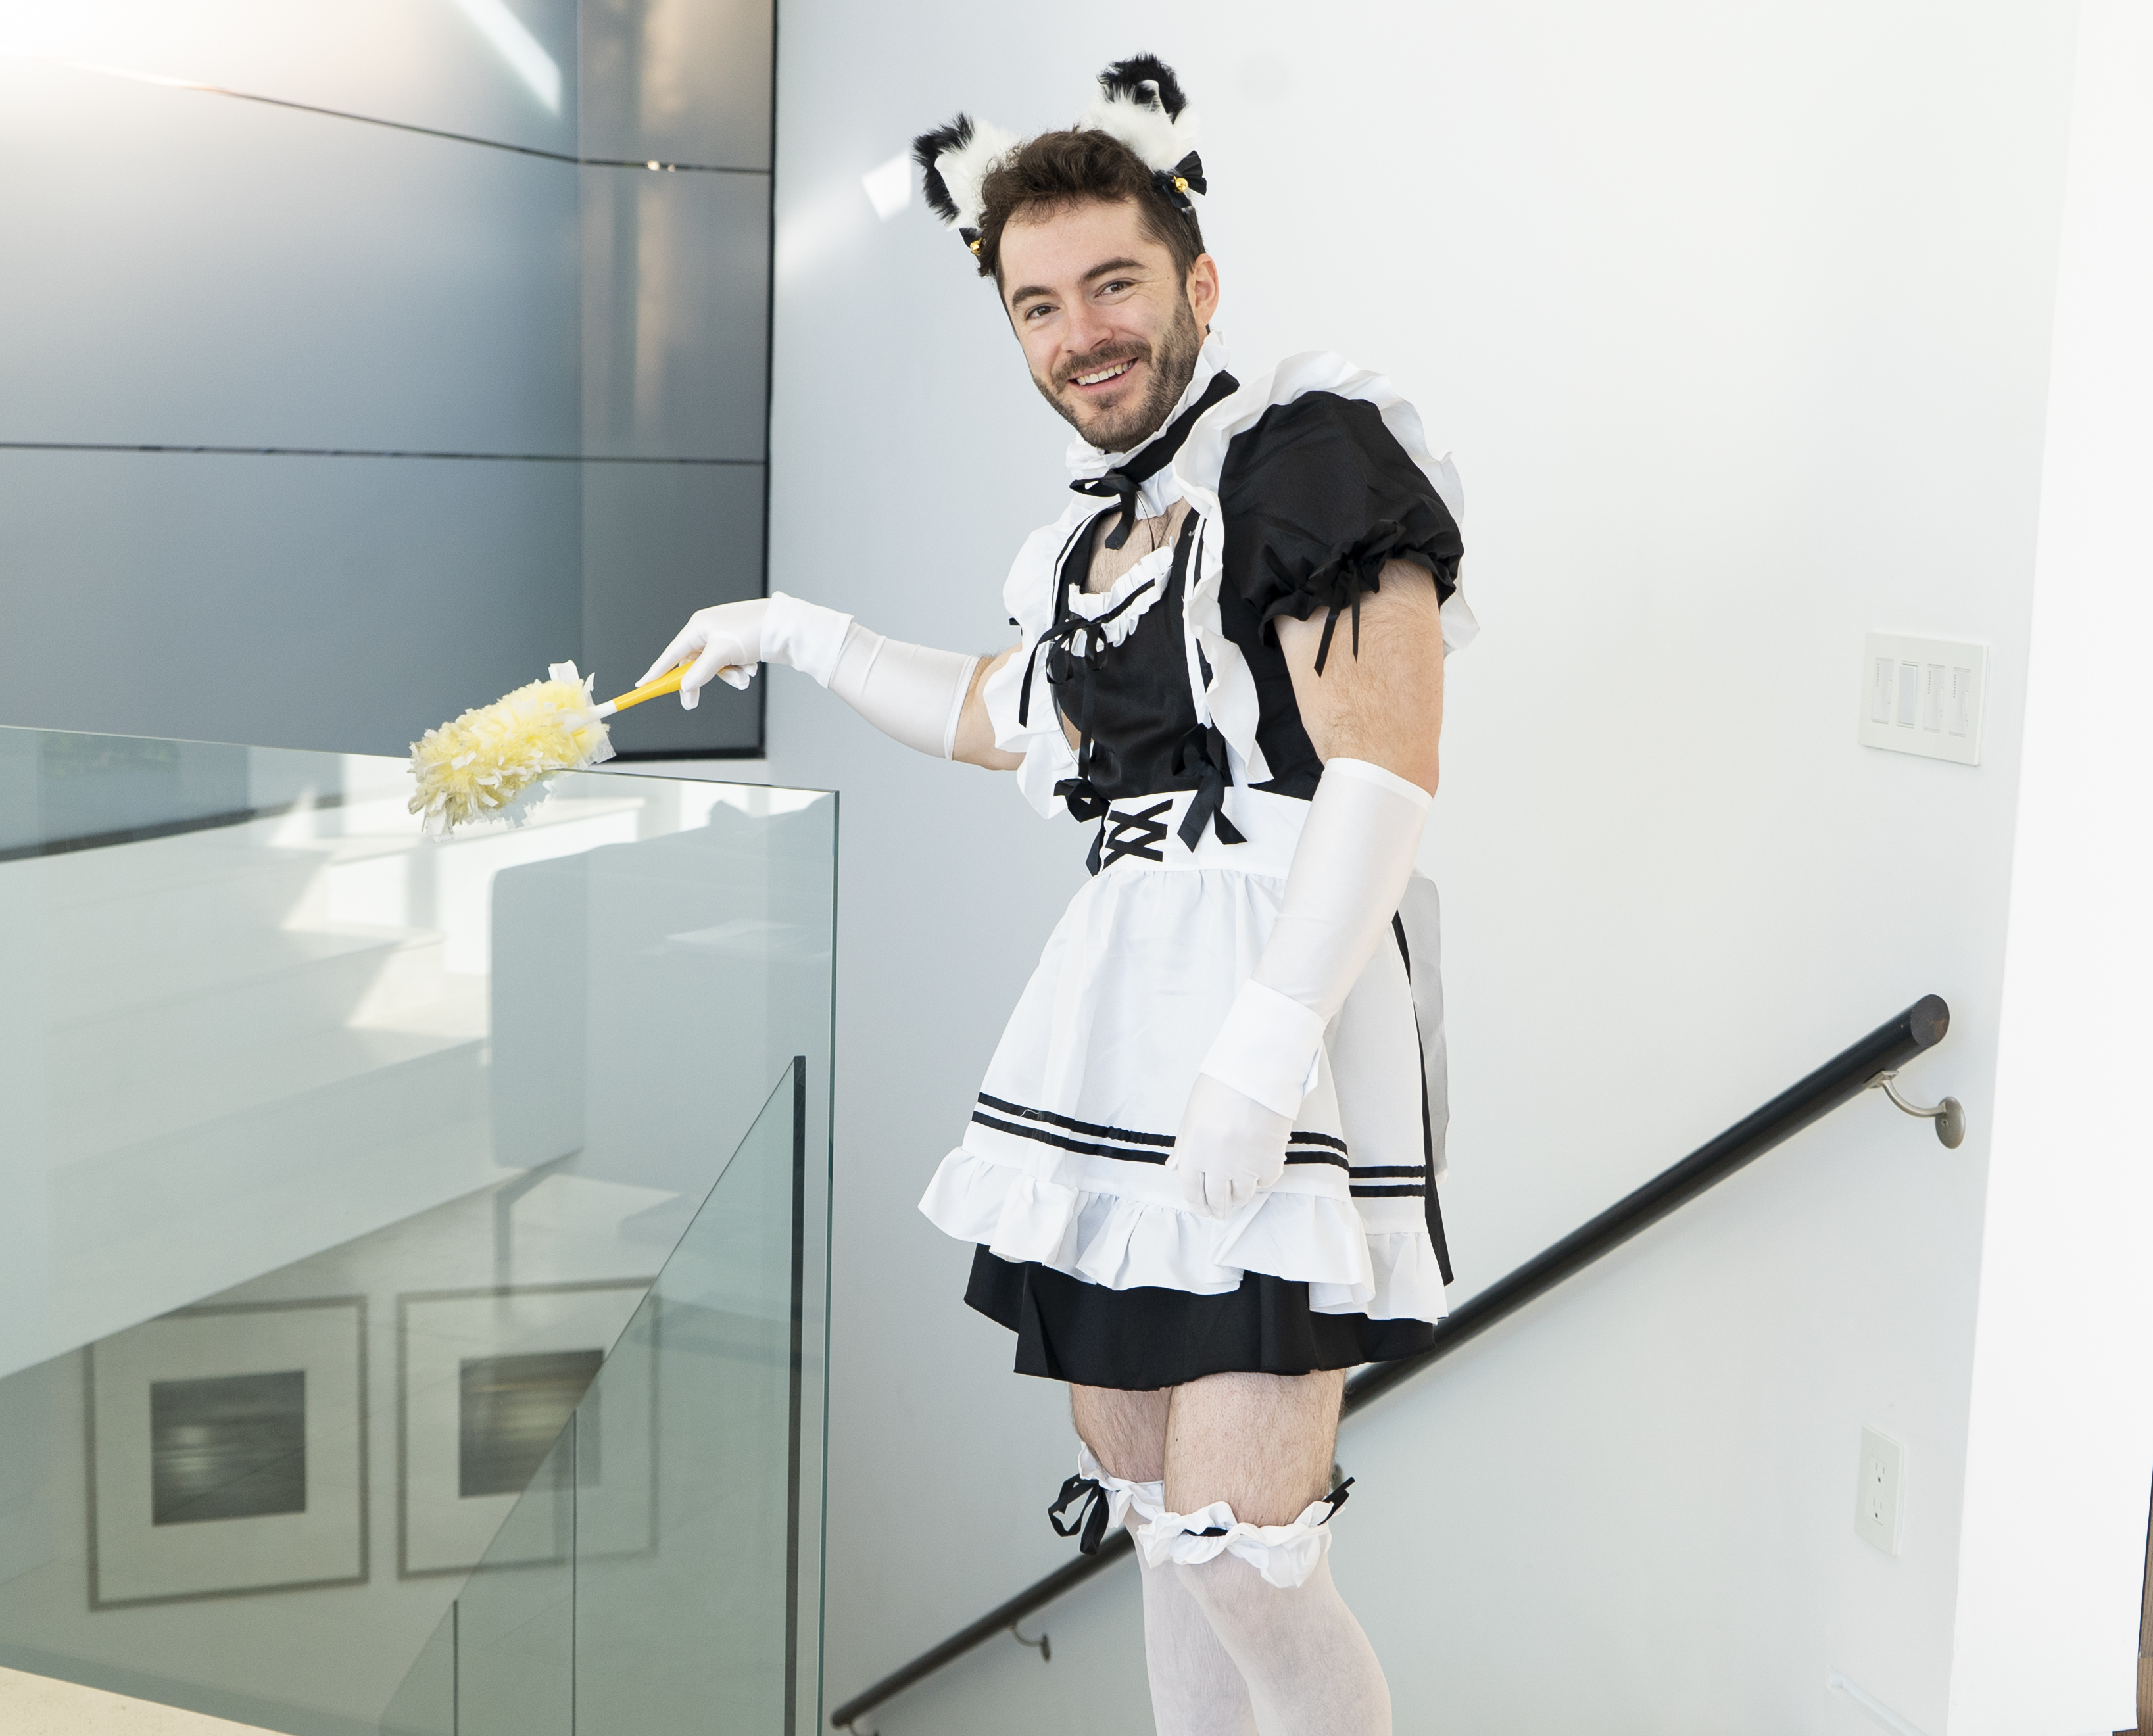 angela unger recommends maid outfit meme pic